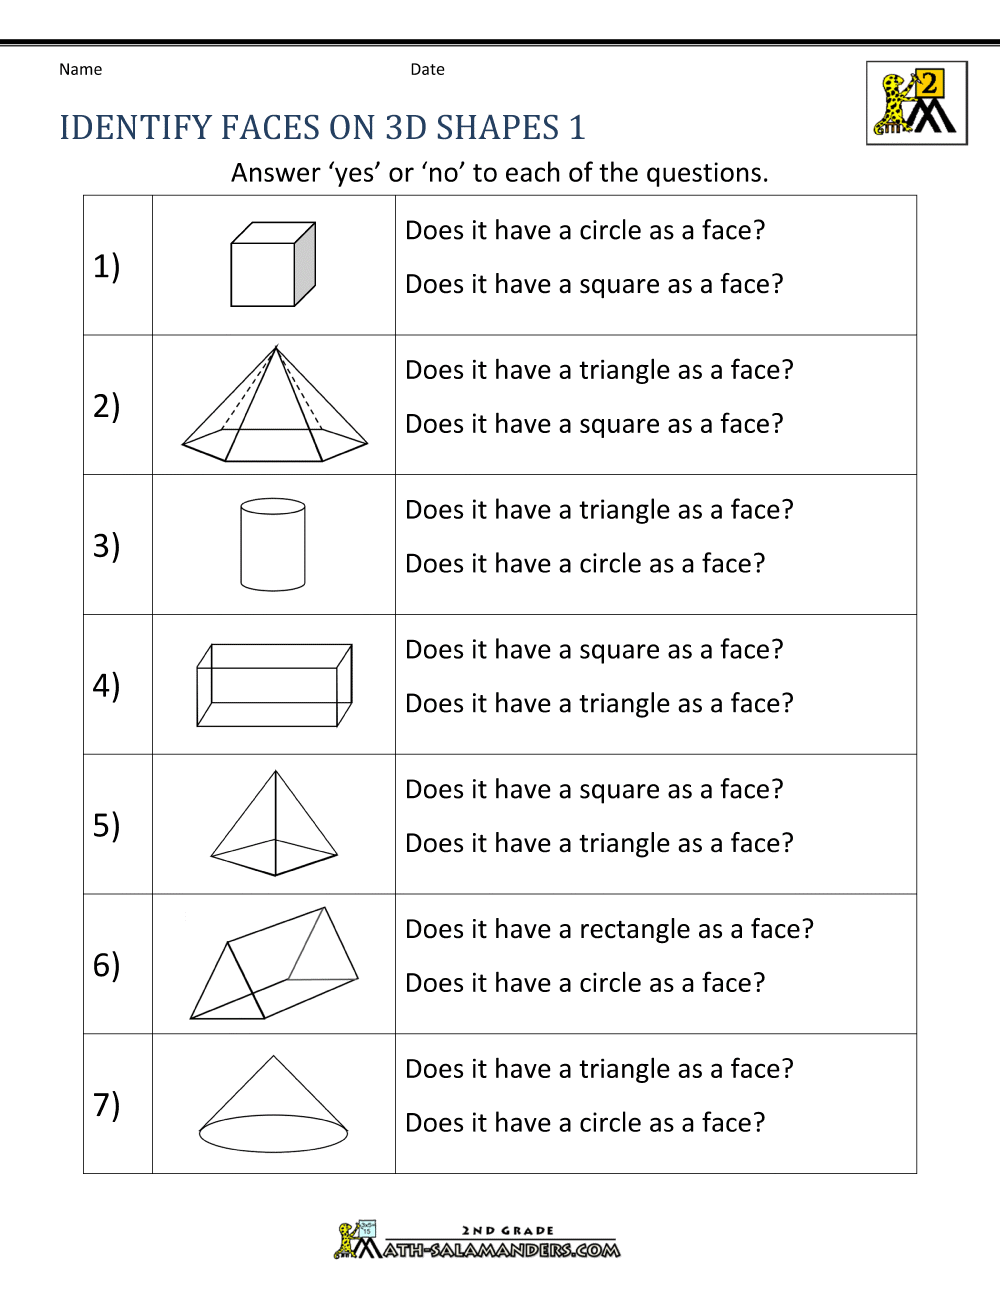 3d Shapes Worksheets Shapes Worksheets 3d Shapes Worksheets Images 